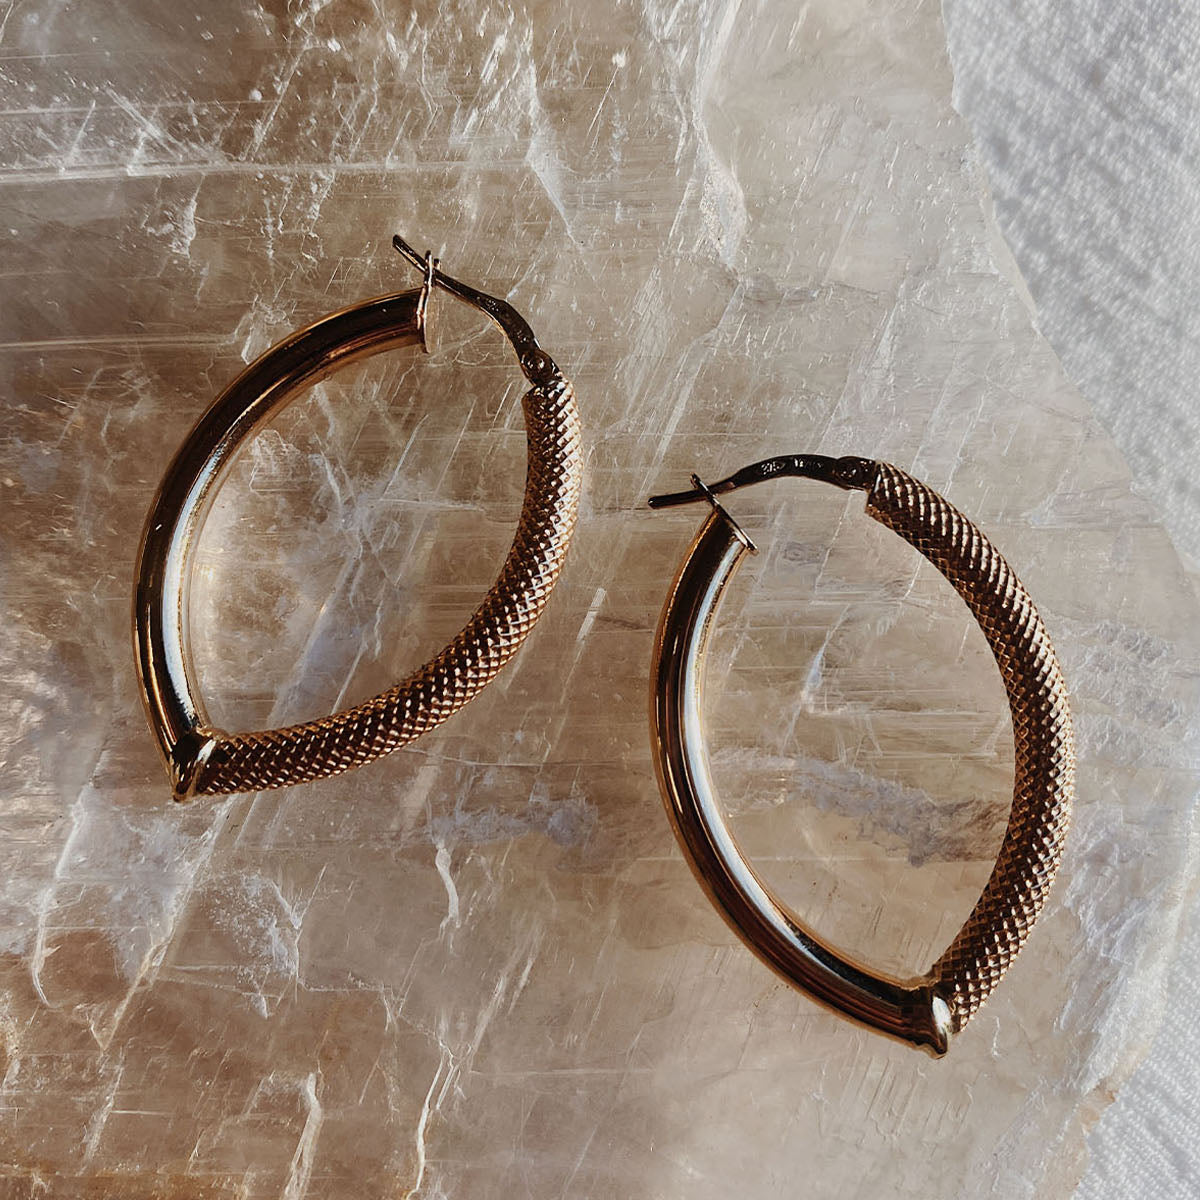 Vintage Textured Direction Pointed Hoops